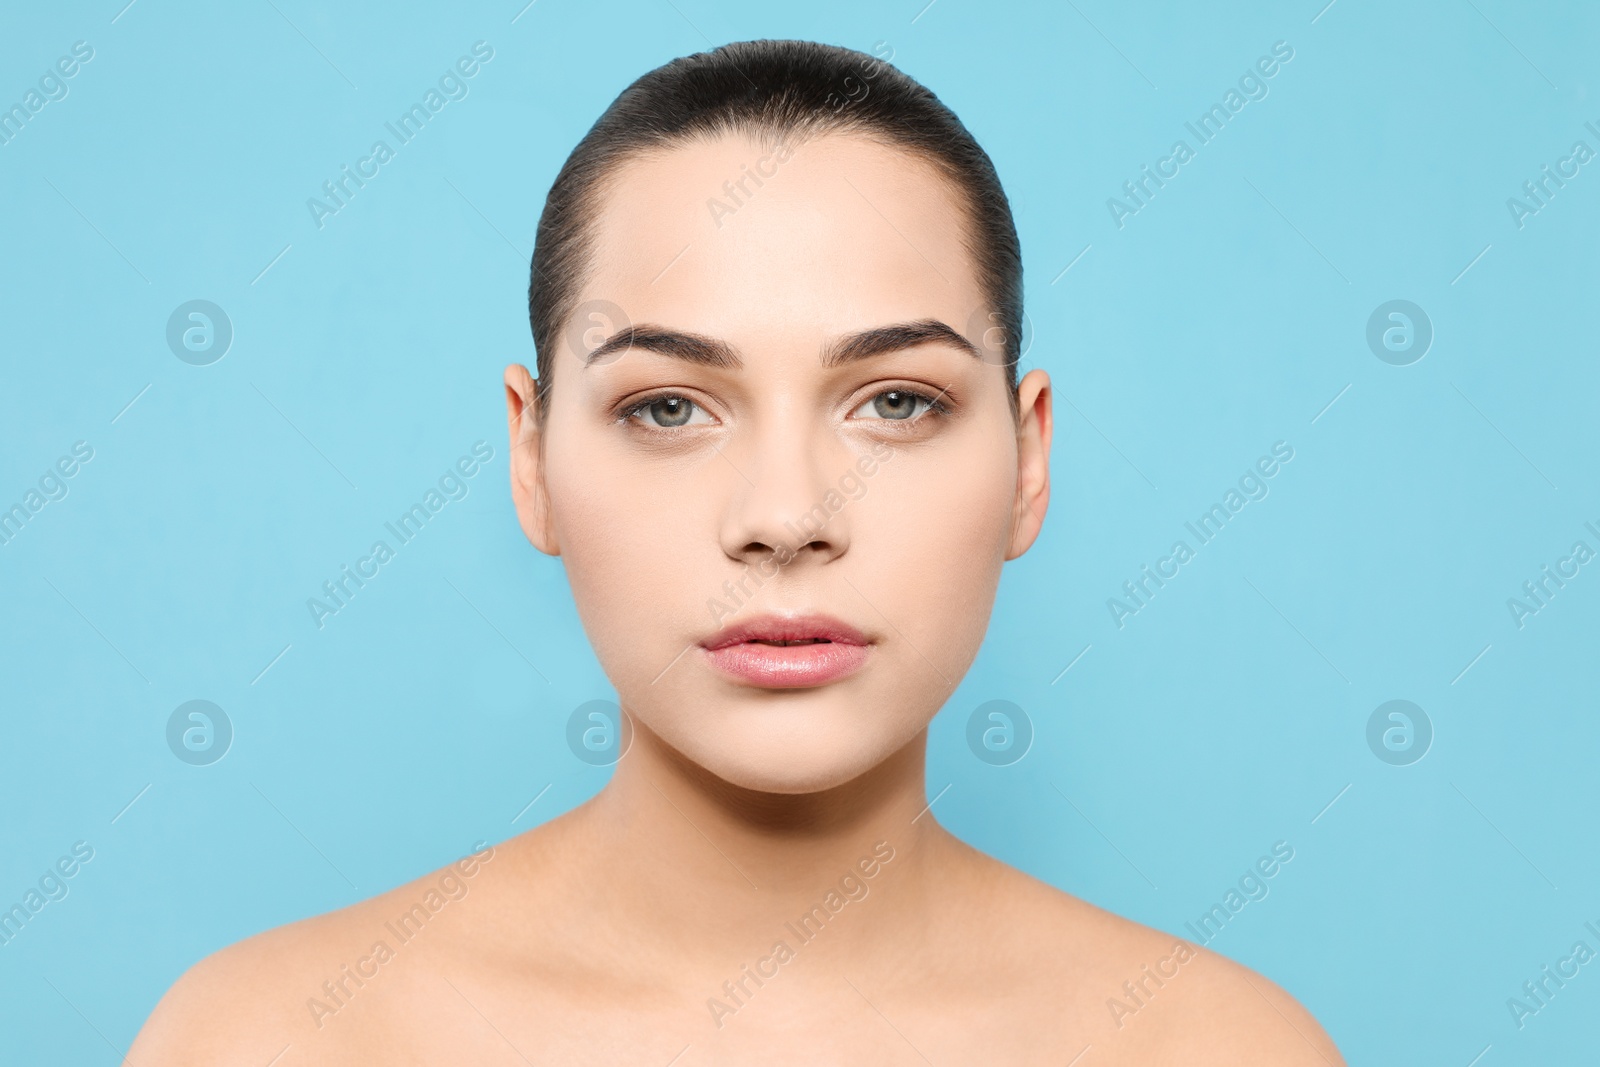 Photo of Portrait of young woman with beautiful face and natural makeup on color background